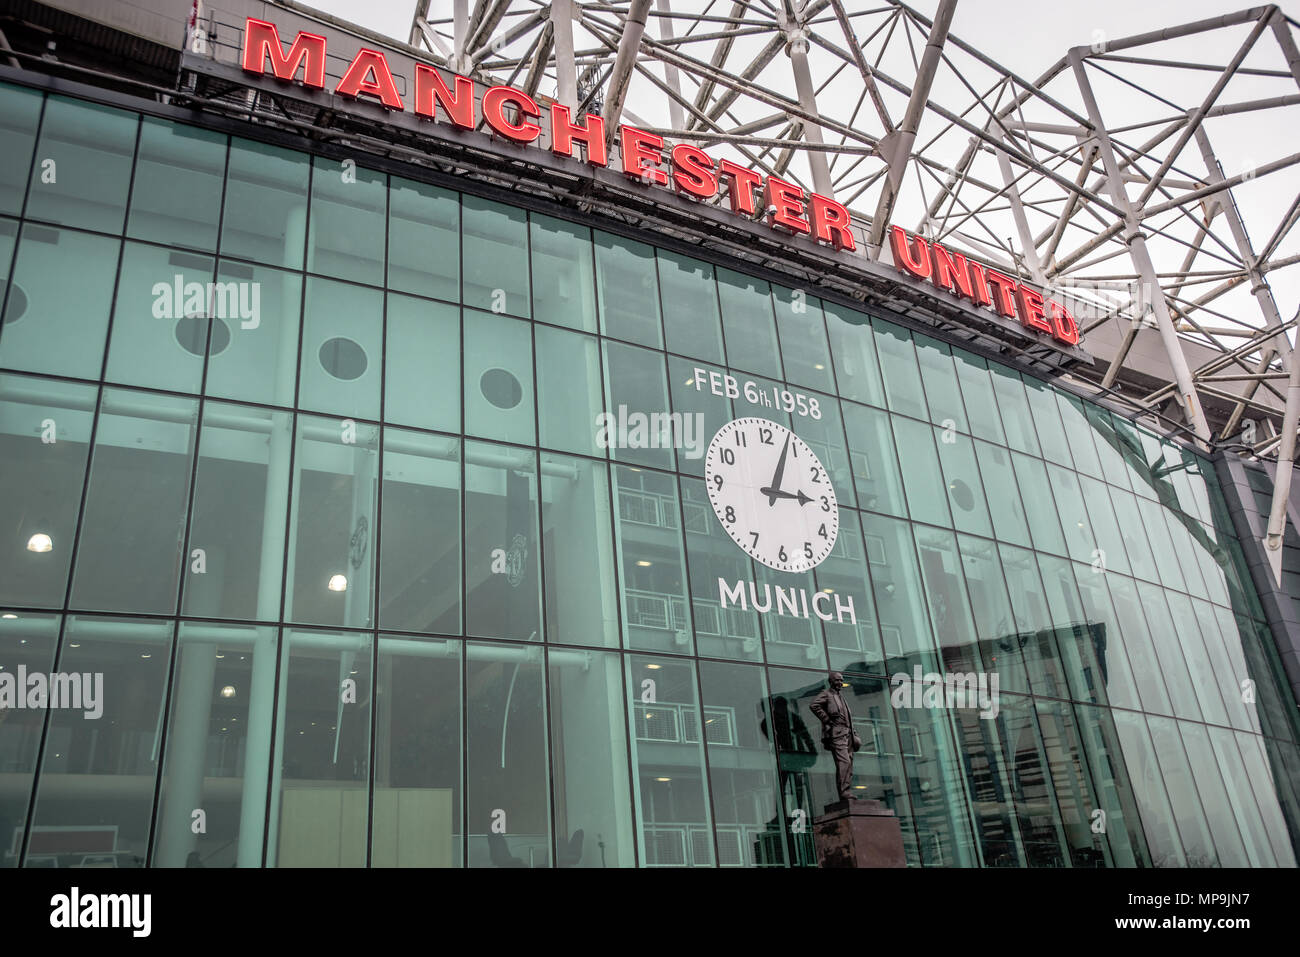 Old Trafford. Manchester United. Munich Air Disaster Memorial. Stockfoto